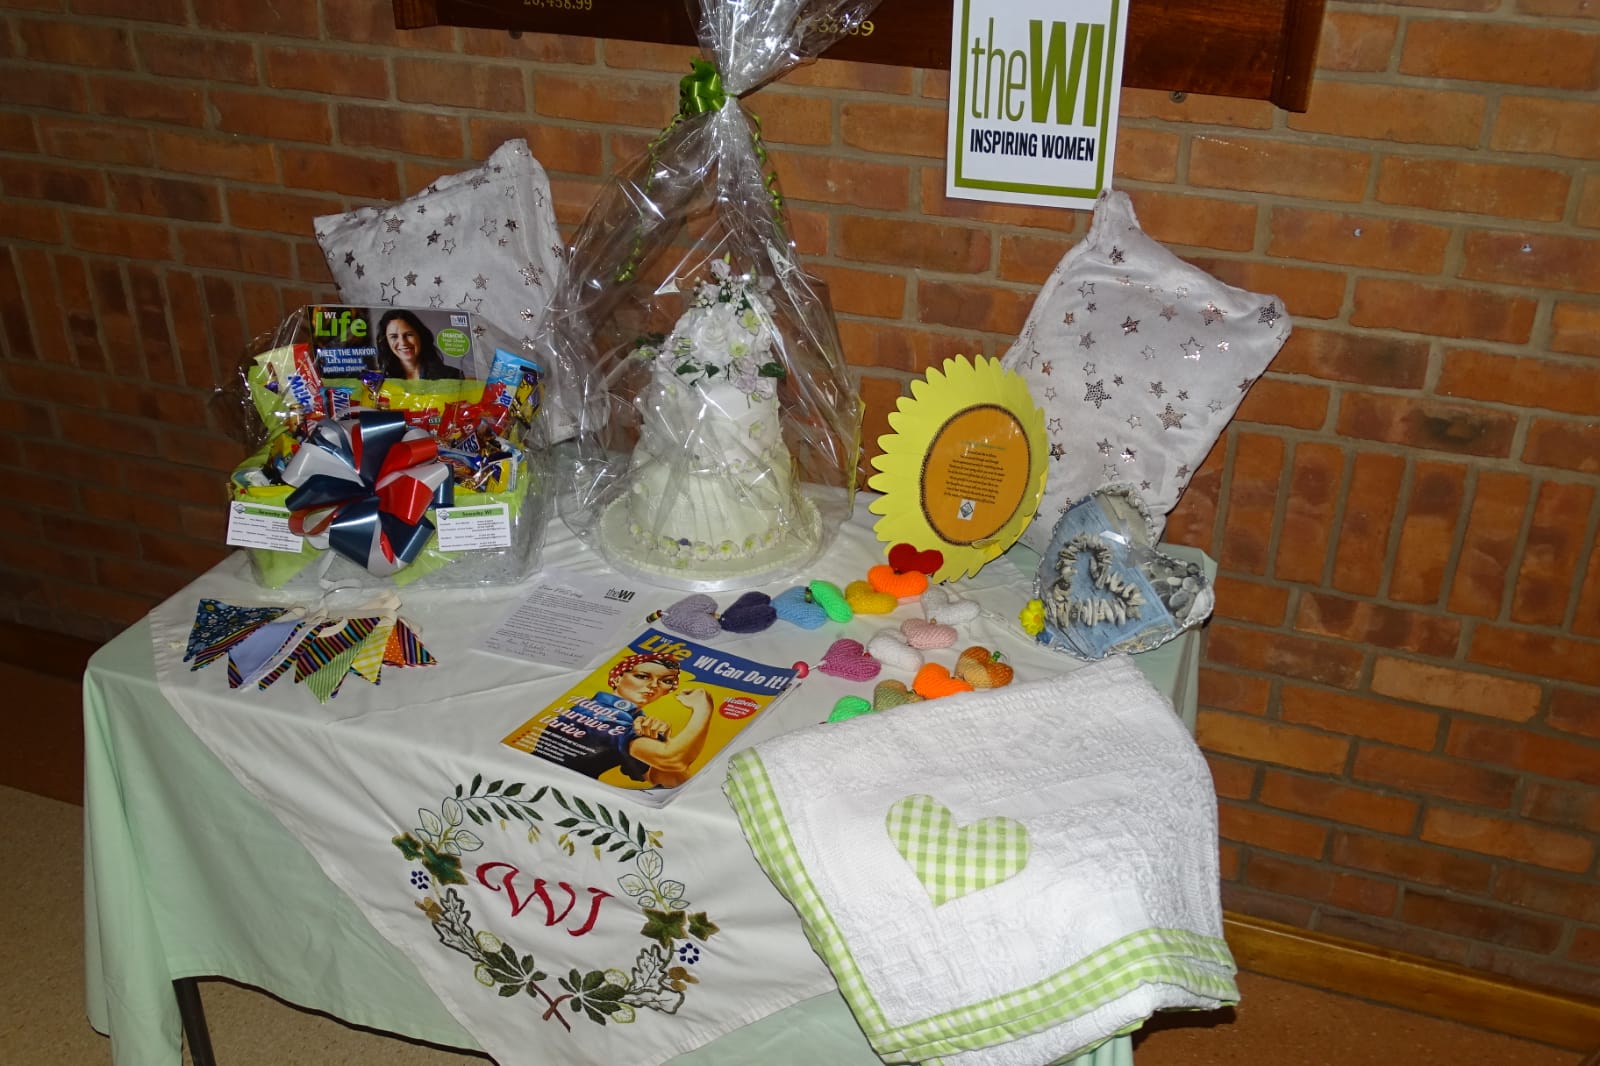 A decorated table with presents